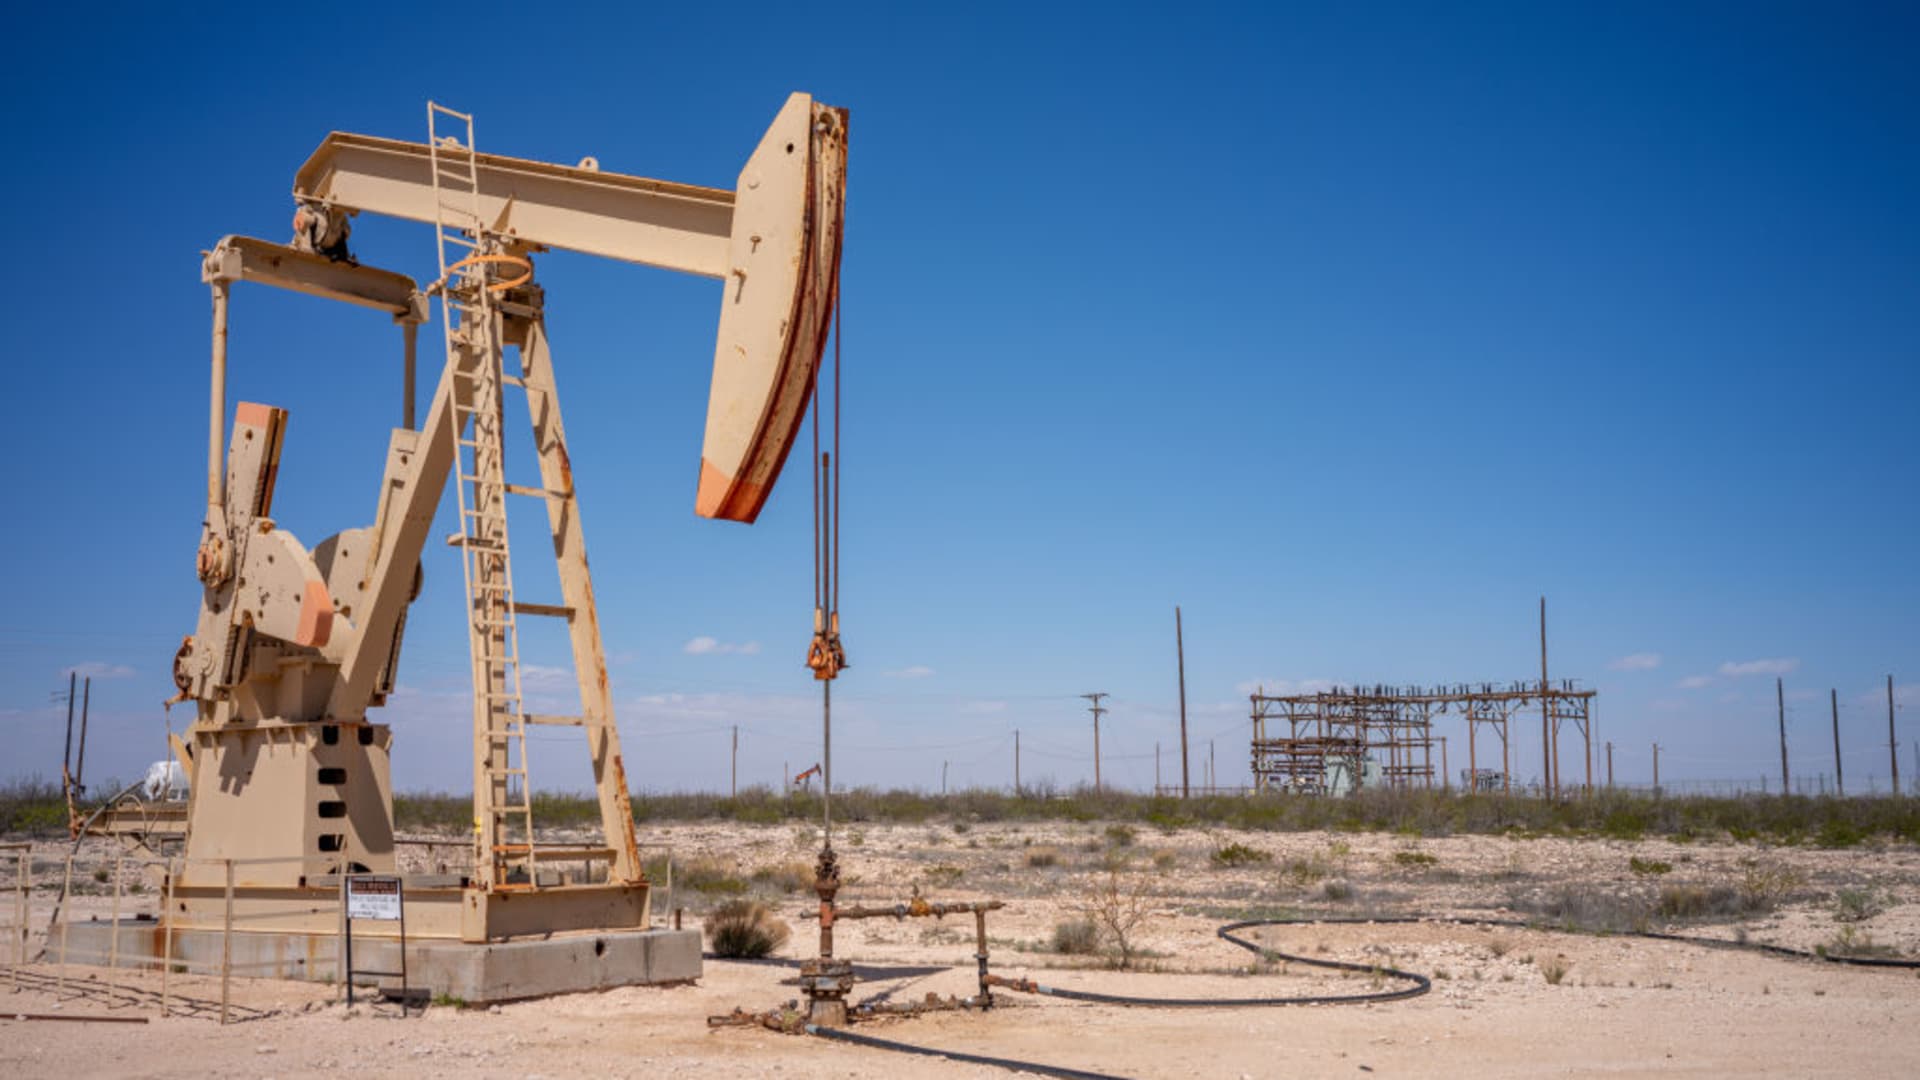 Morgan Stanley upgrades the energy sector, citing ‘compelling valuation’